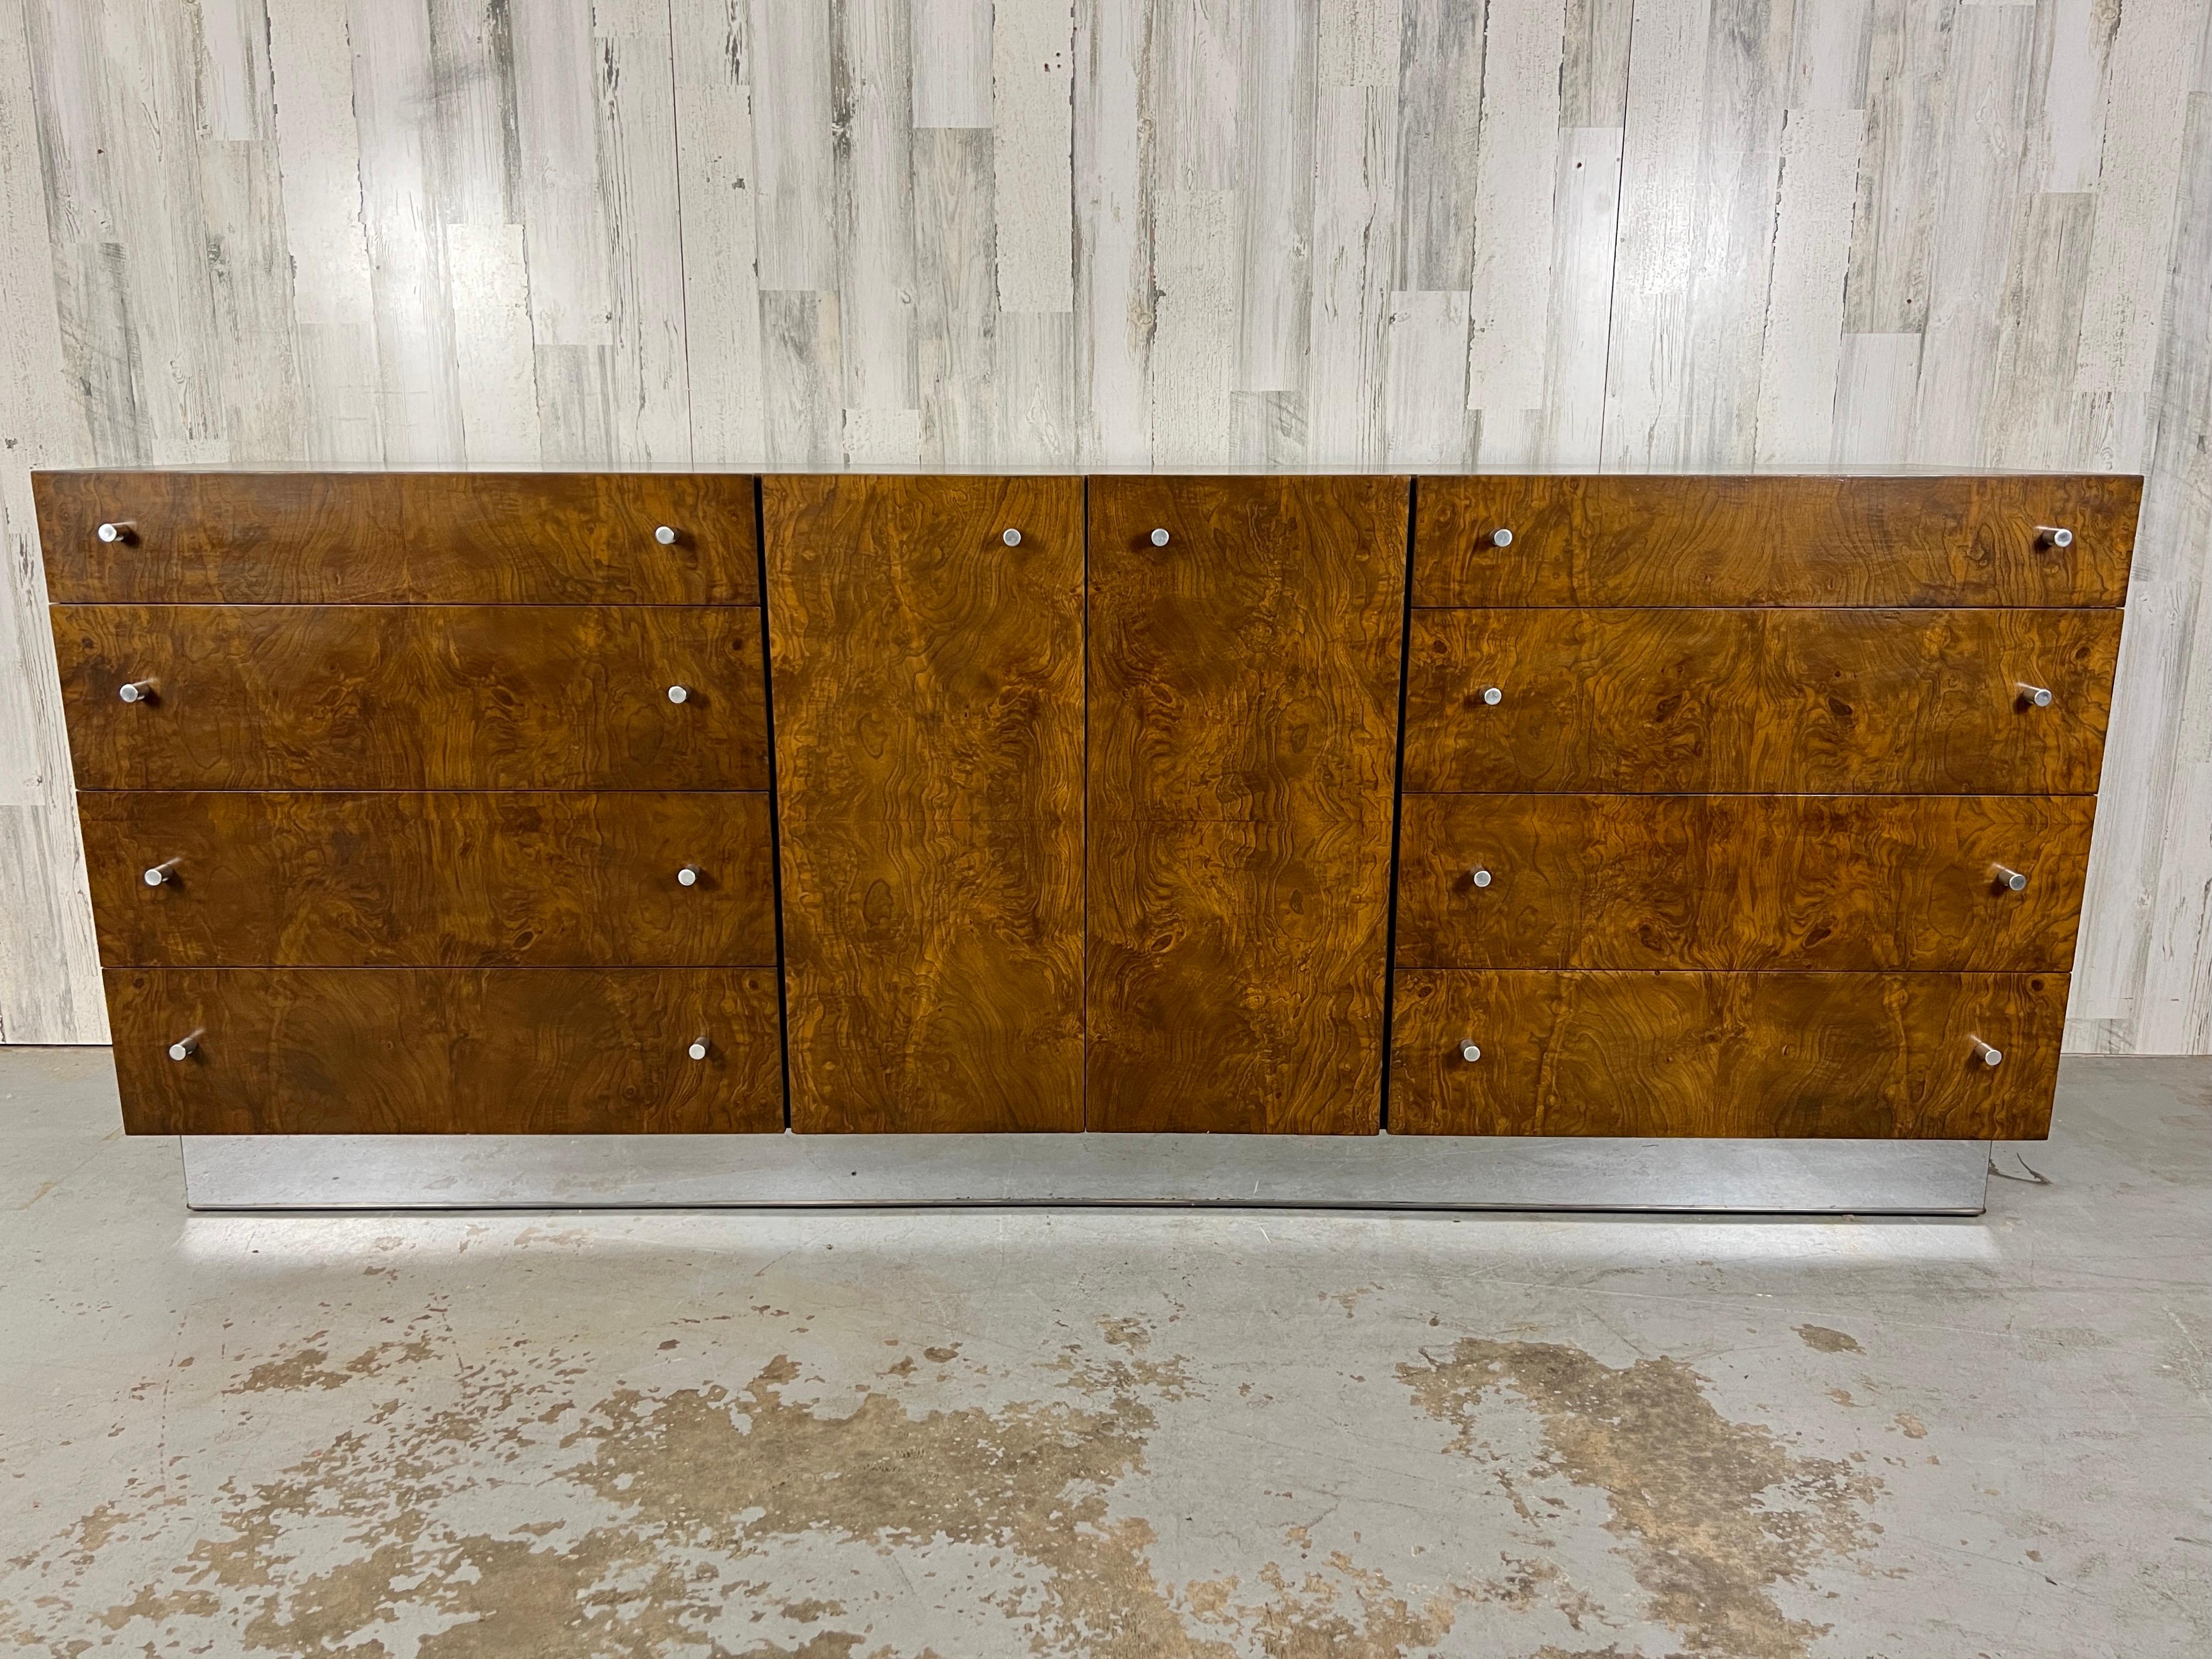 Milo Baughman for Thayer Coggin Burl & Chrome Dresser. The dresser is a true mid-century classic with 8 drawers and 2 doors, providing ample storage space. Adorned with beautiful burl wood on all sides and a chrome plinth, it combines both